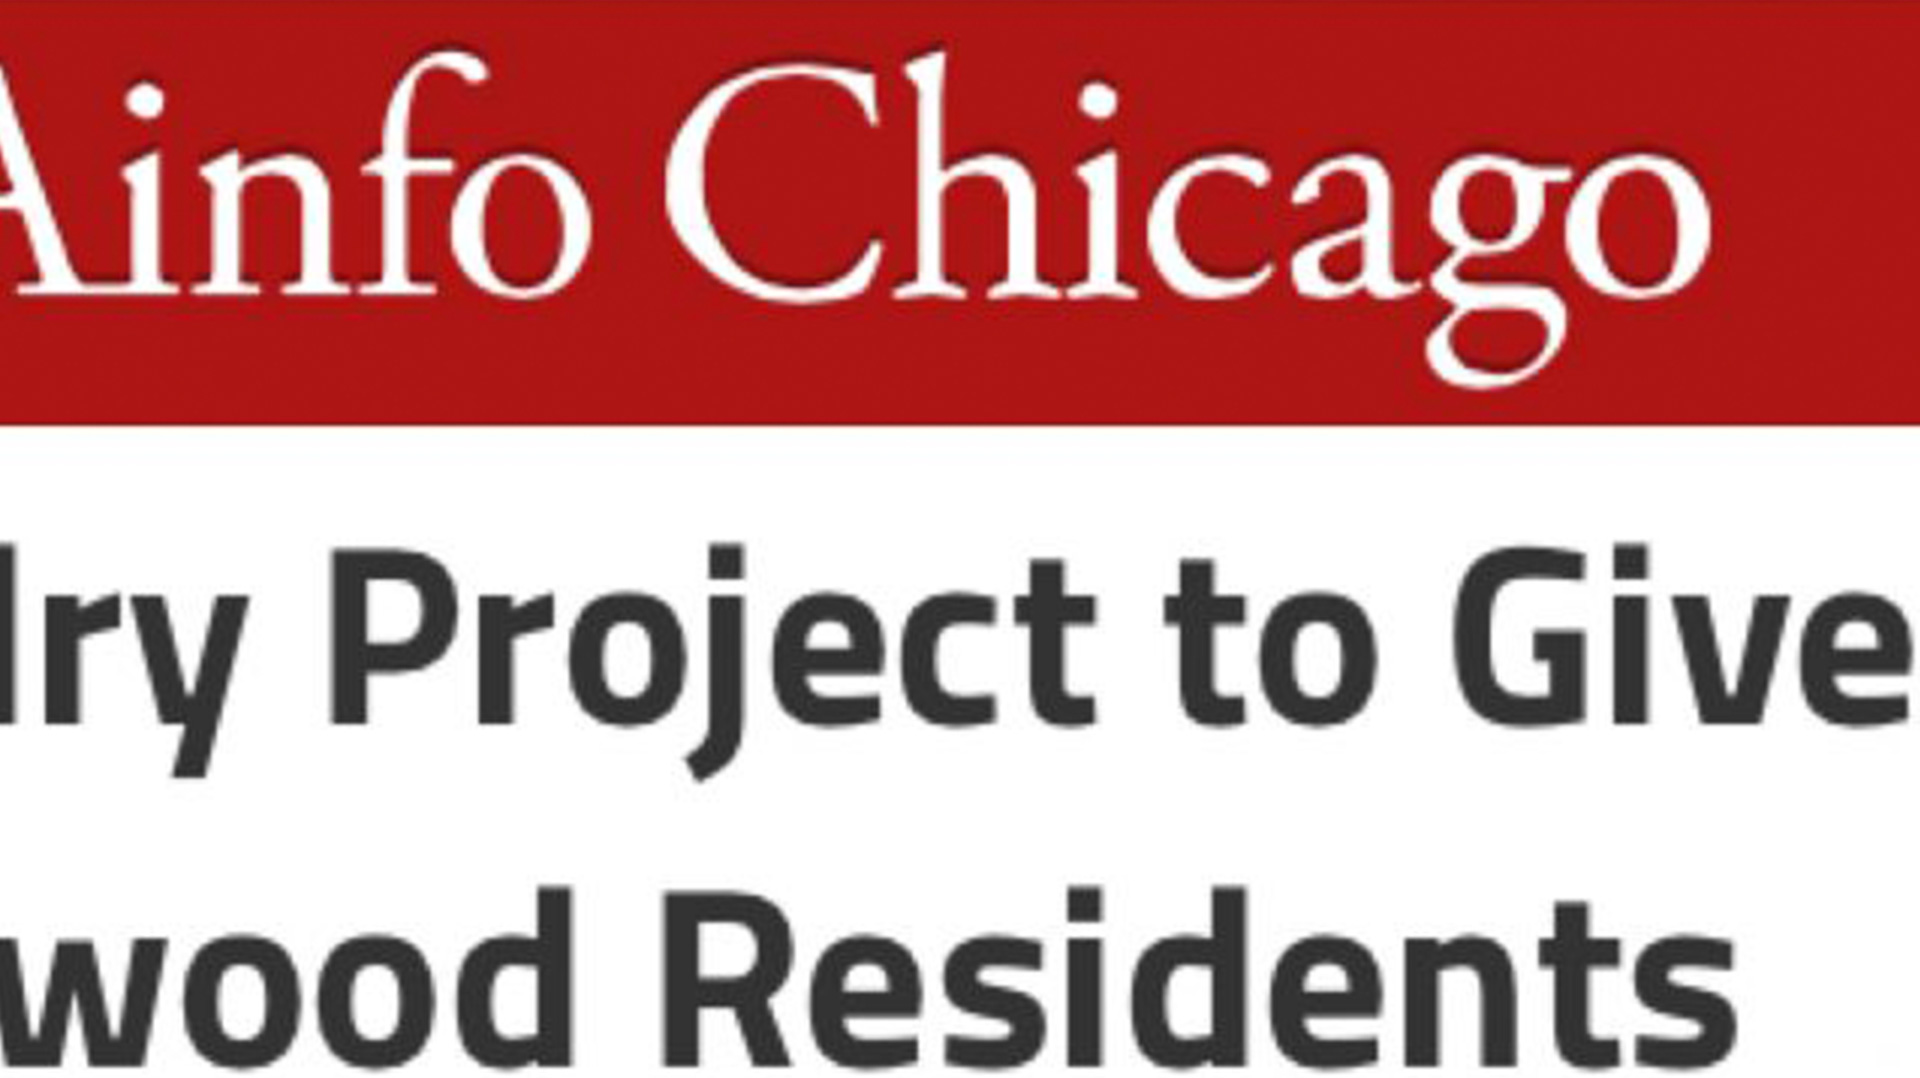 DNAinfo Chicago – Laundry Project